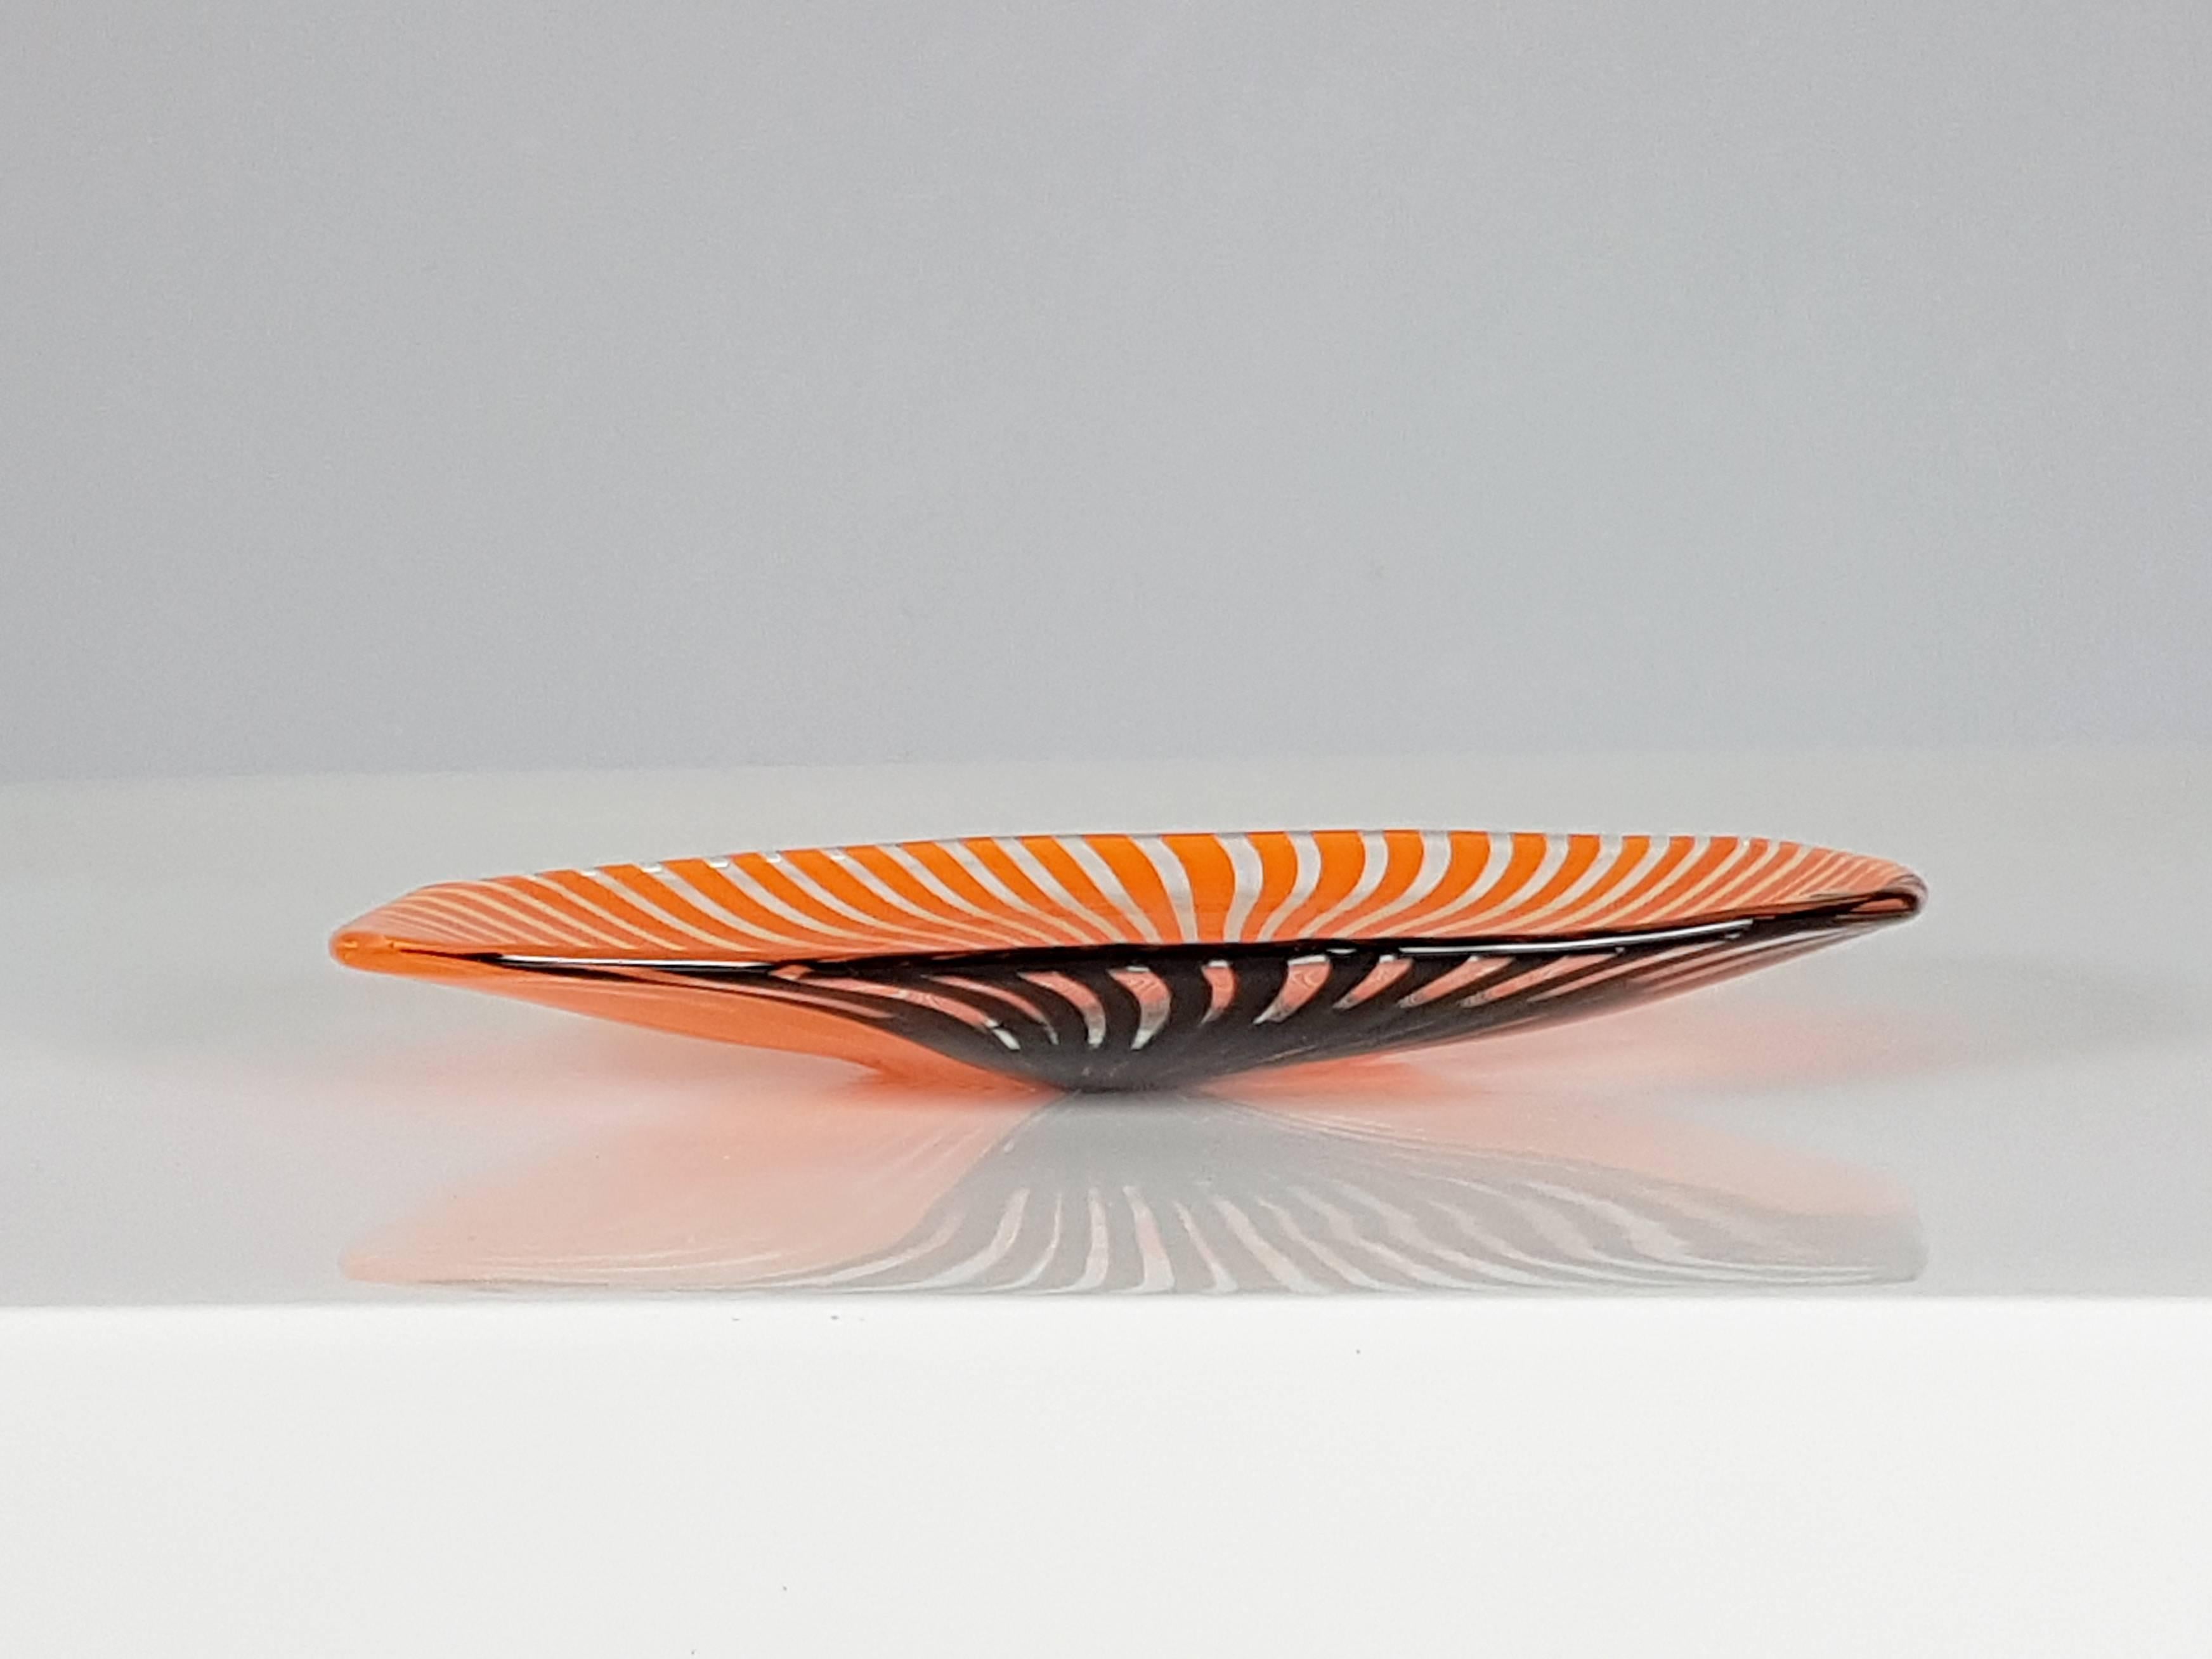 Small and thick plate designed by Gian Maria Potenza and manufactured by La Murrina in the 1960s. It remains in perfect condition with its original paper label.